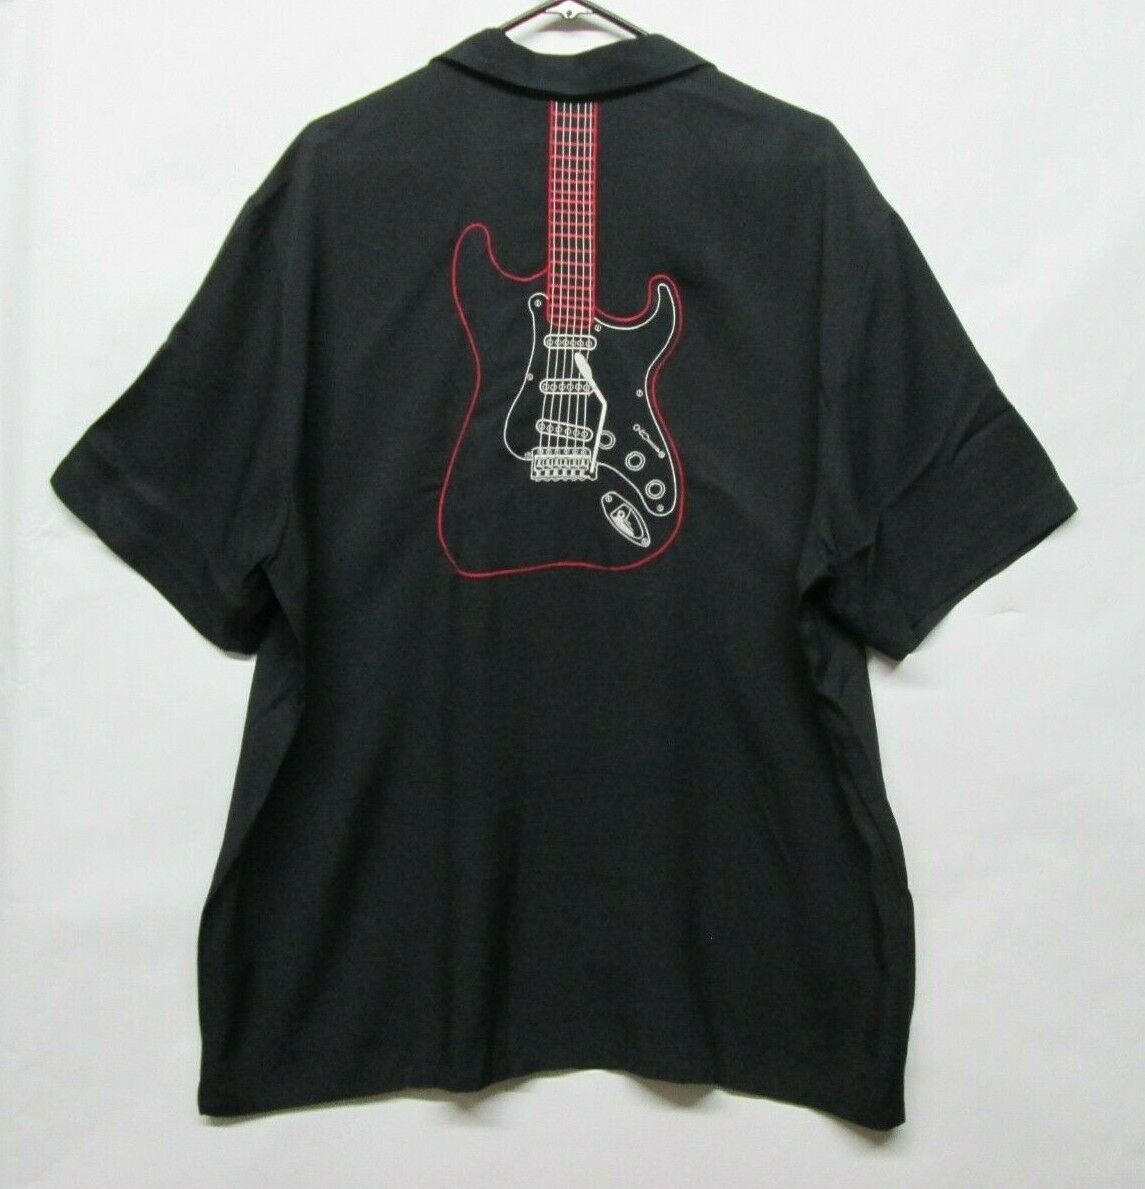 Primary image for Fender by Davinci USA Made Rayon Pearl Snap Shirt Sz L Black Strat Guitar Back